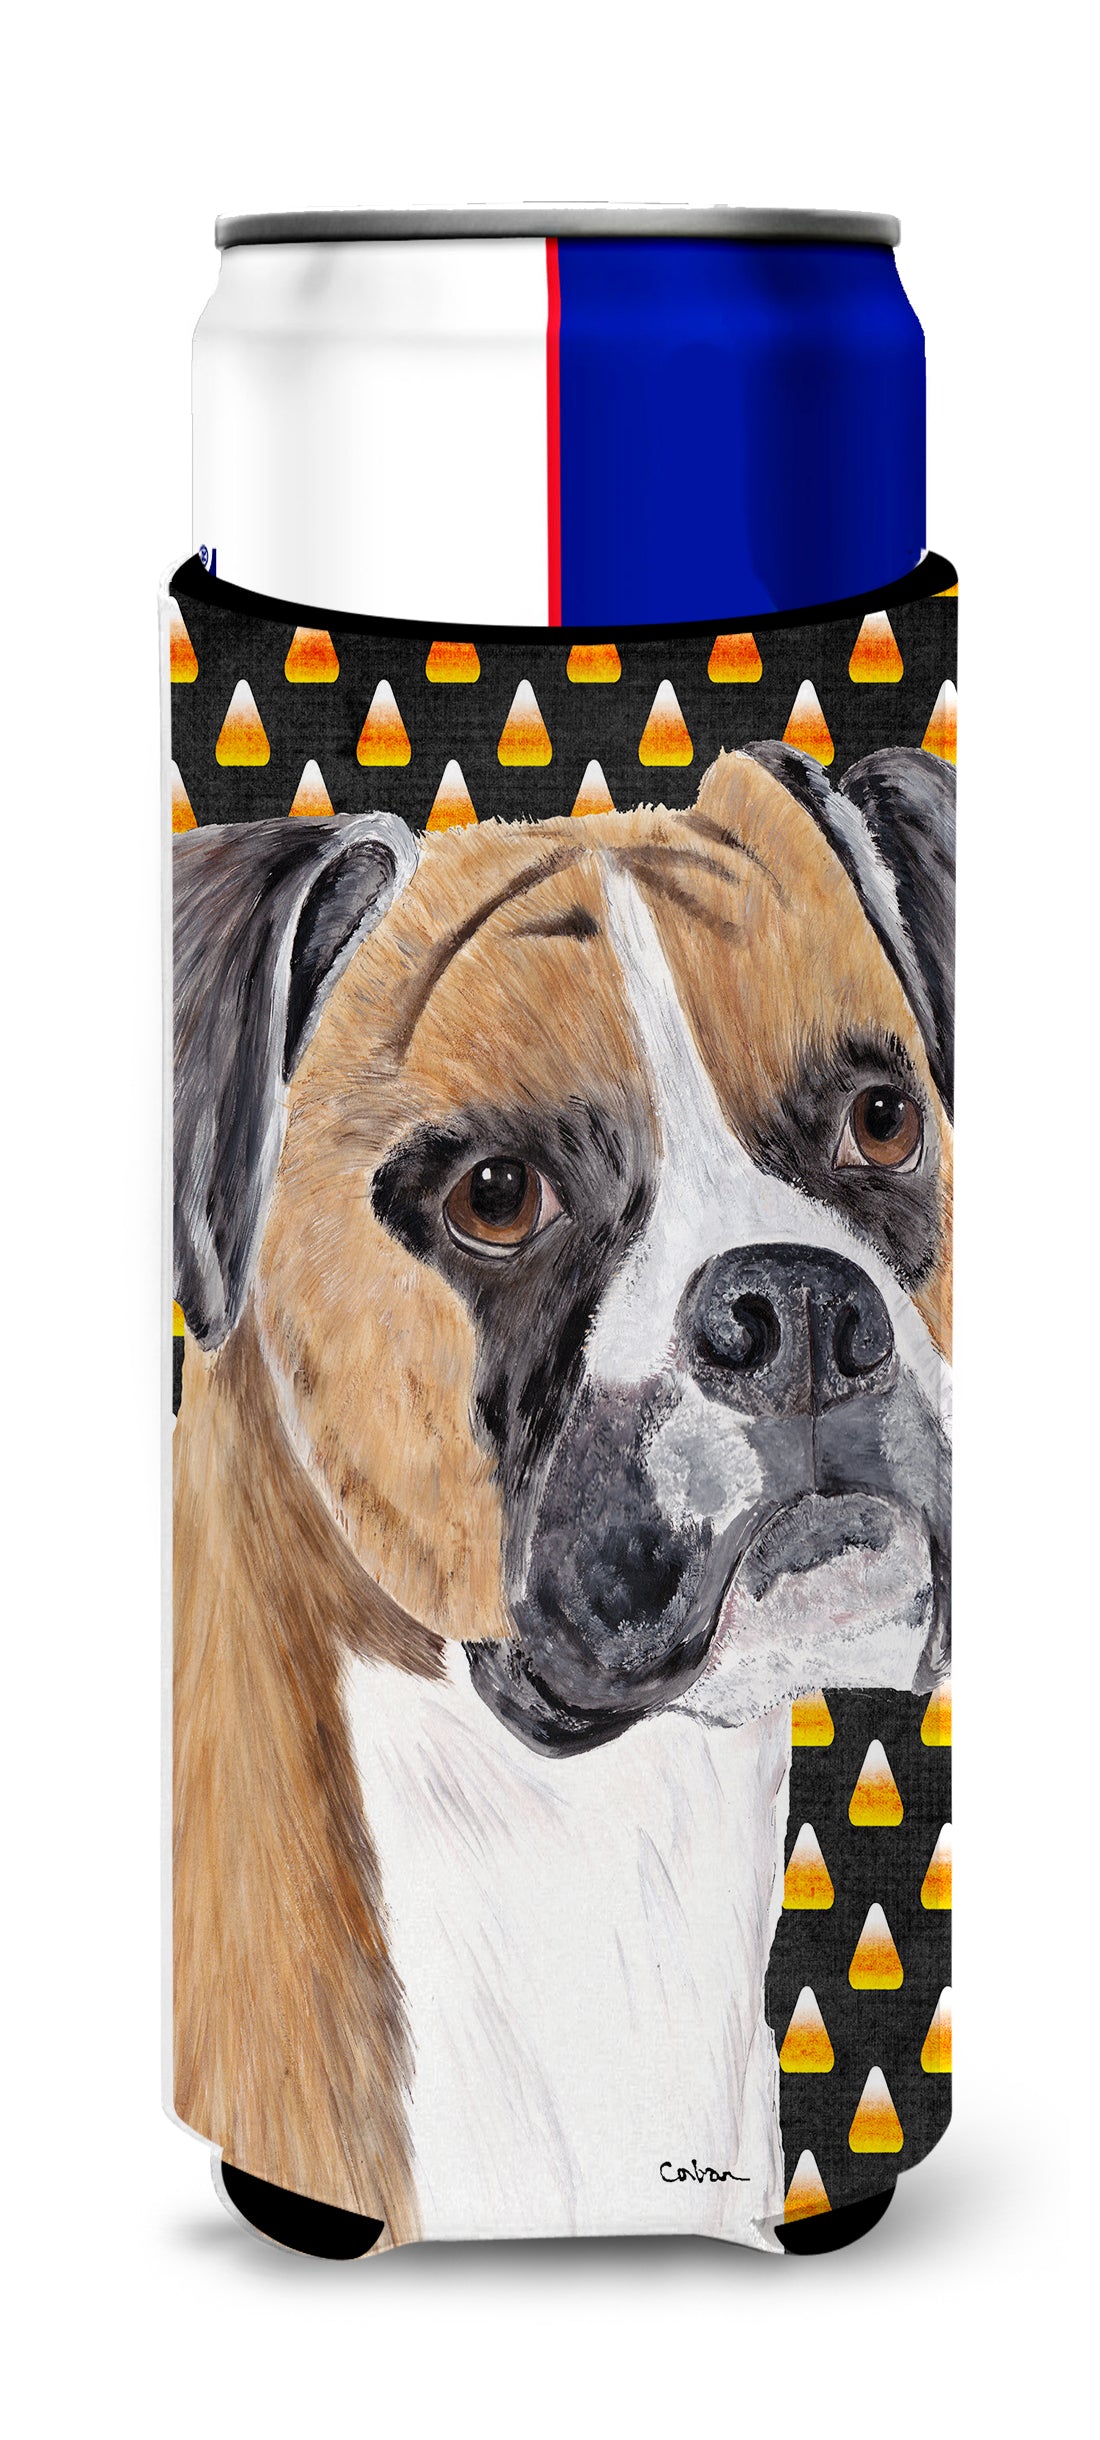 Boxer Fawn Uncropped Ears Candy Corn Halloween Portrait Ultra Beverage Insulators for slim cans SC9191MUK